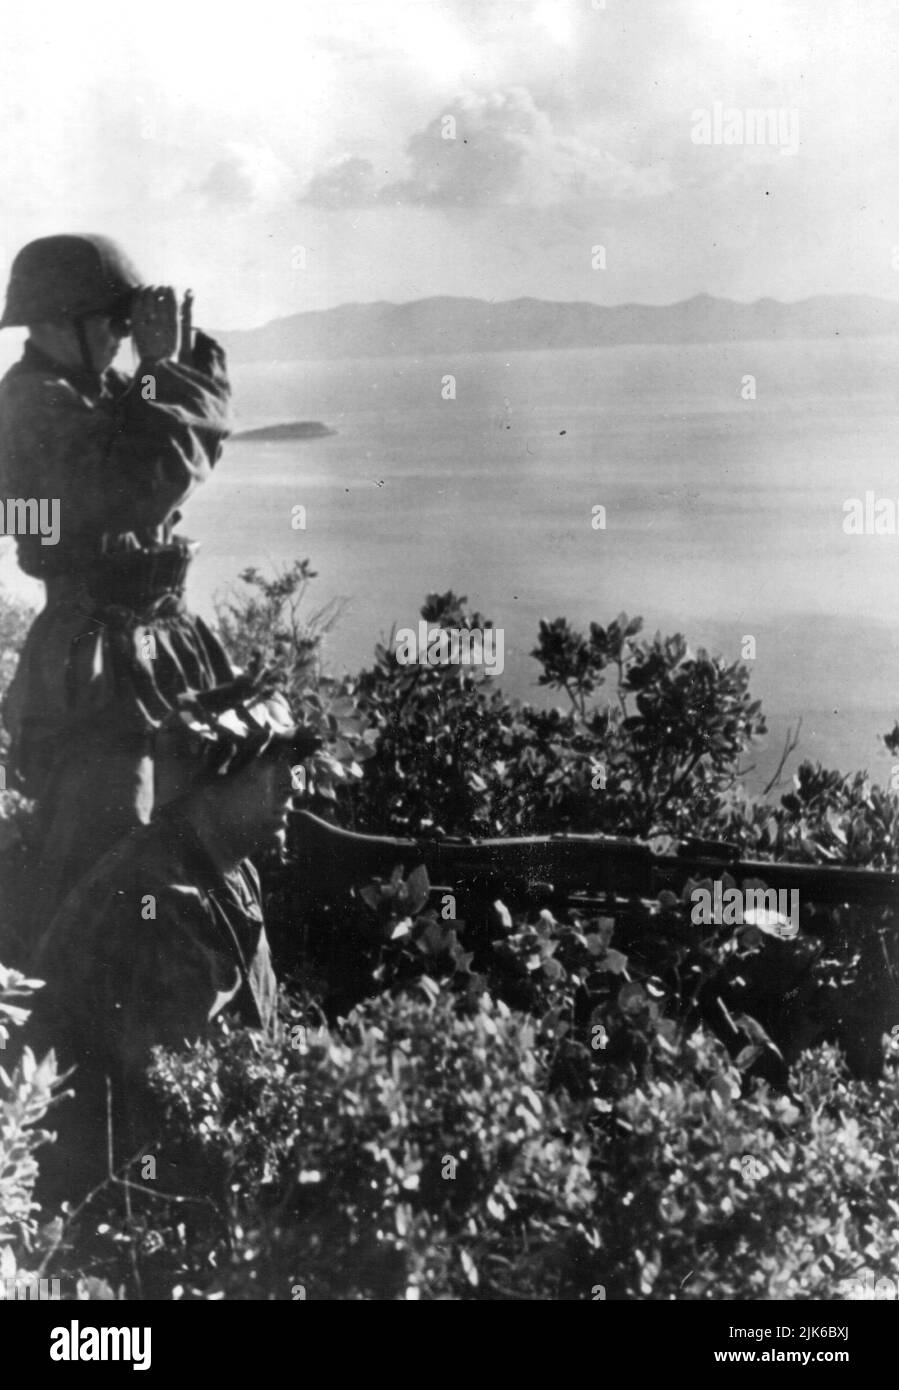 The Nazi German elite troops th Waffen-SS had many divisions of foreign volunteers who believed in nazism. Two soldiers from the 7th SS Volunteer Mountain Division Prinz Eugen with their MG 42 machine gun on the Dalmatian coast, 1943 Stock Photo